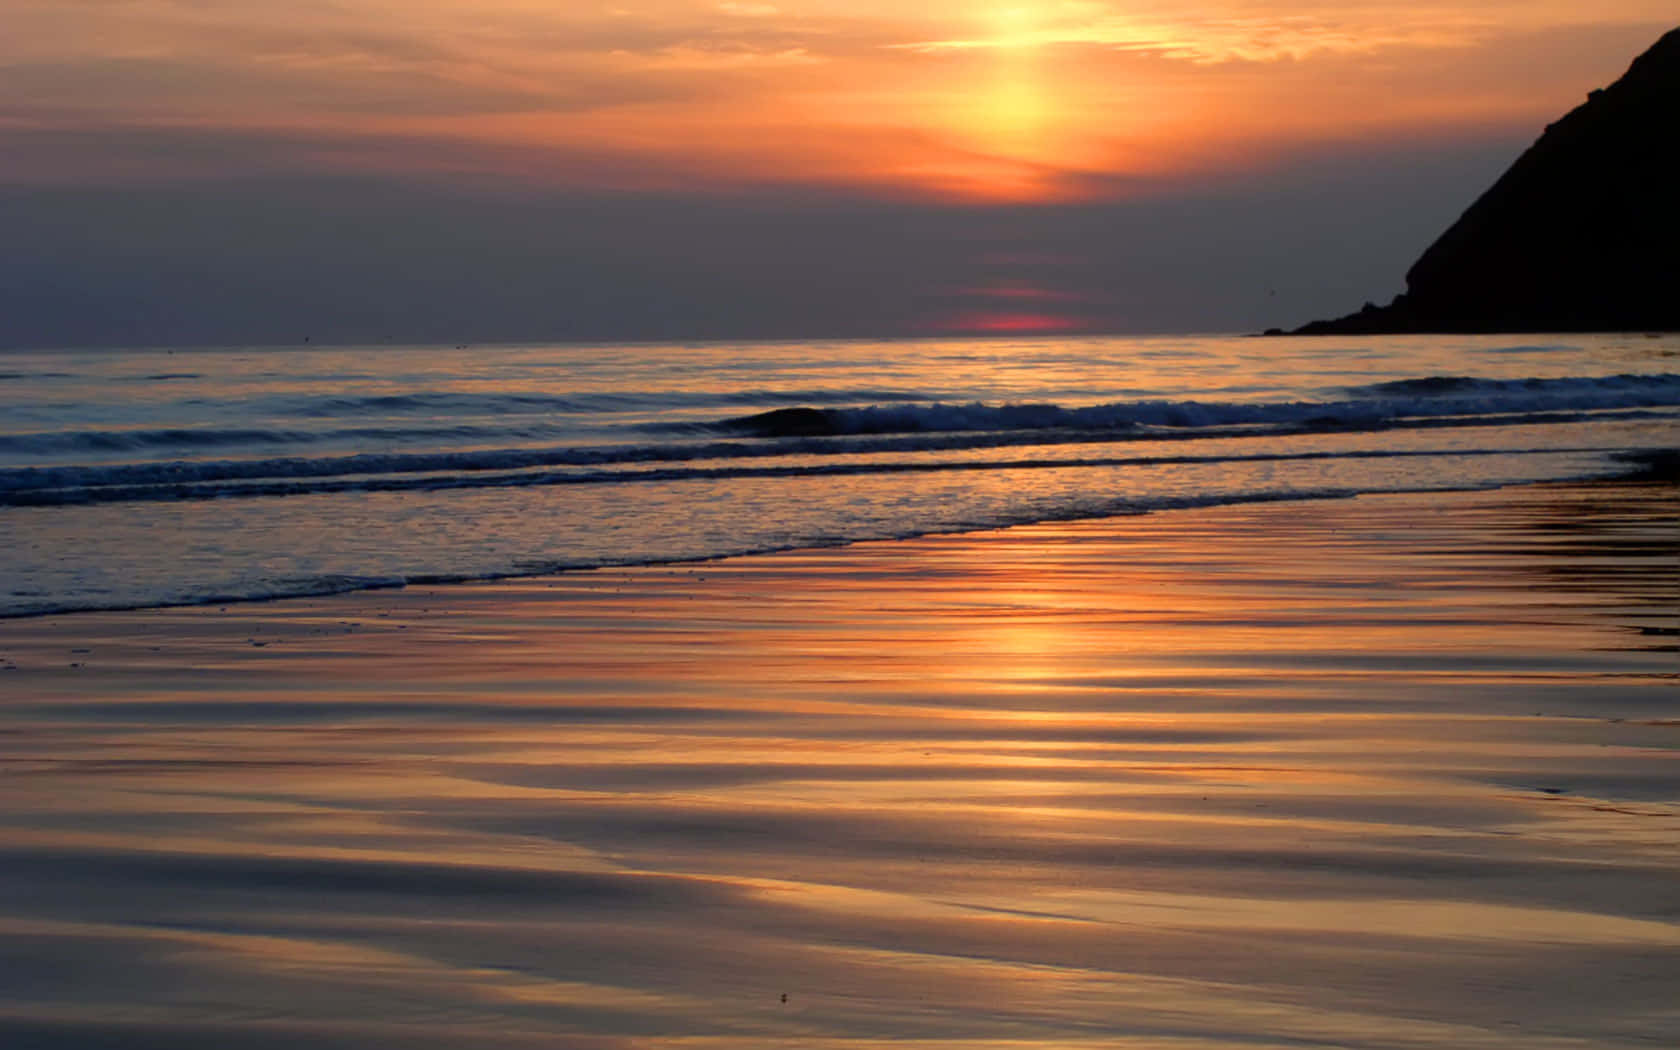 Take in the beauty of a magnificent beach sunset